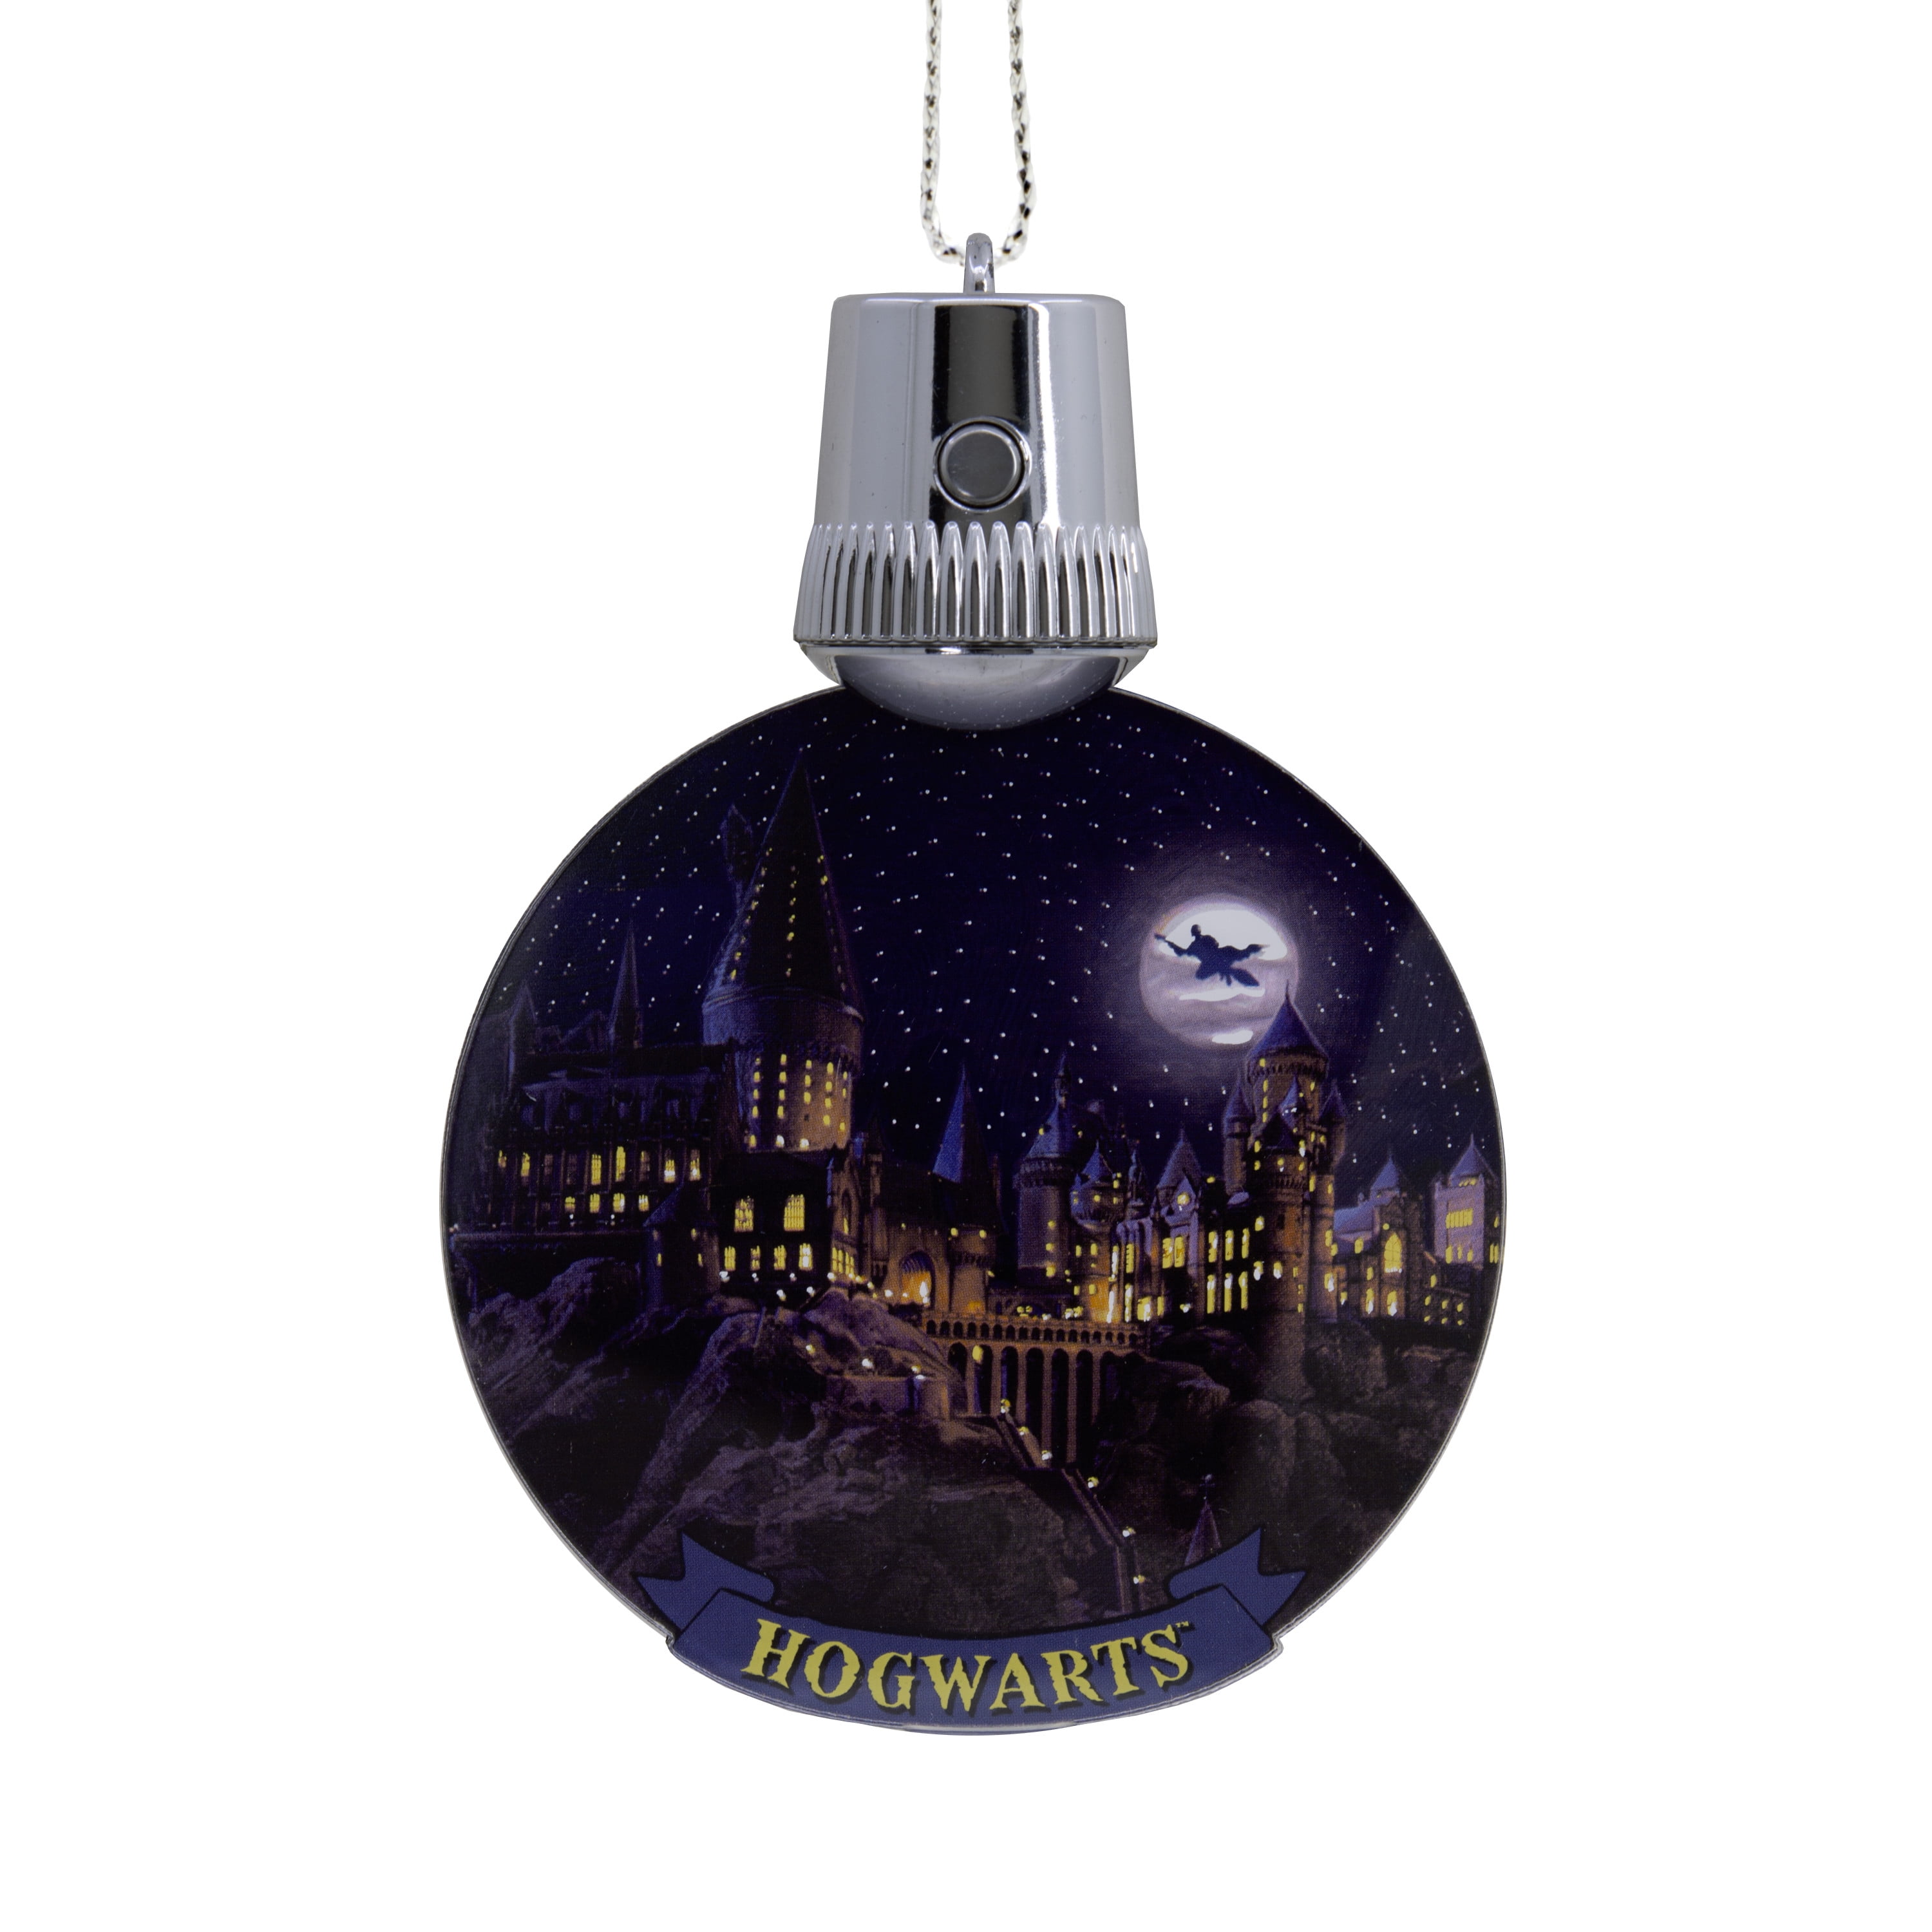 The Harry Potter Hallmark Ornaments at Target Adds that Wizardly Spirit To  The Holiday Season ⋆ Spirit of the Castle